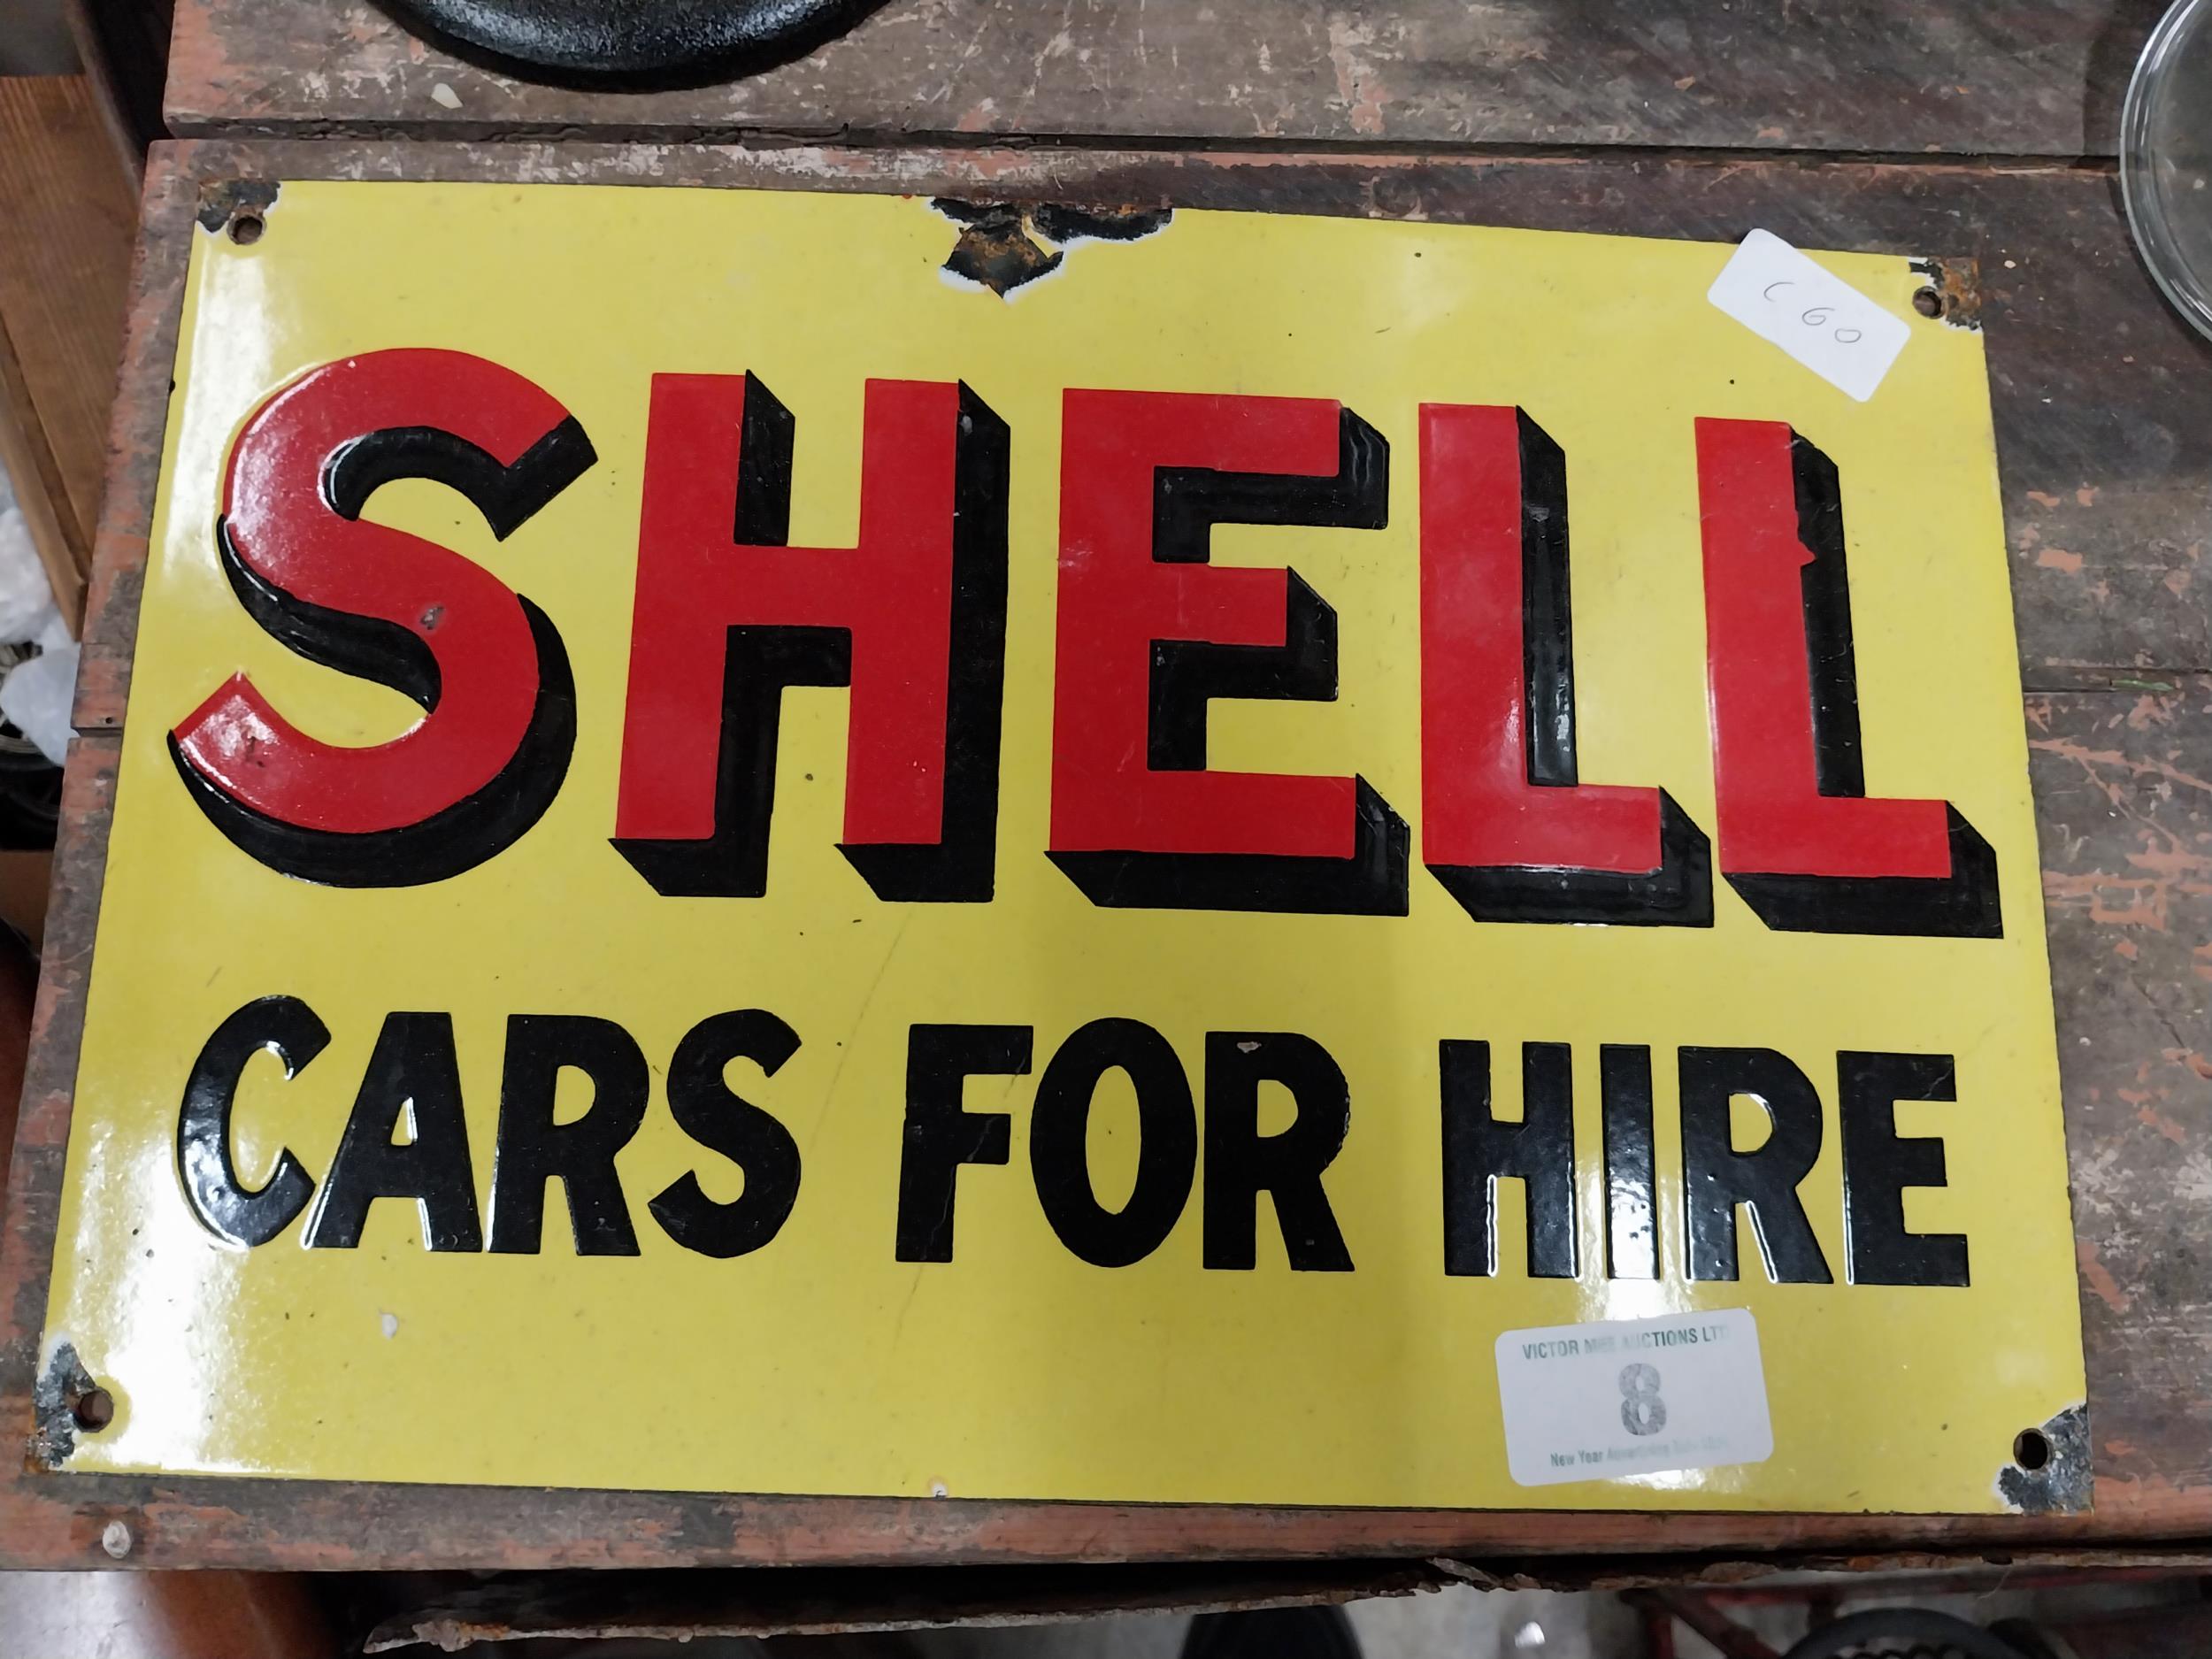 Shell Cars For Hire enamel advertising sign. {38 cm H x 24 cm W}. - Image 3 of 3